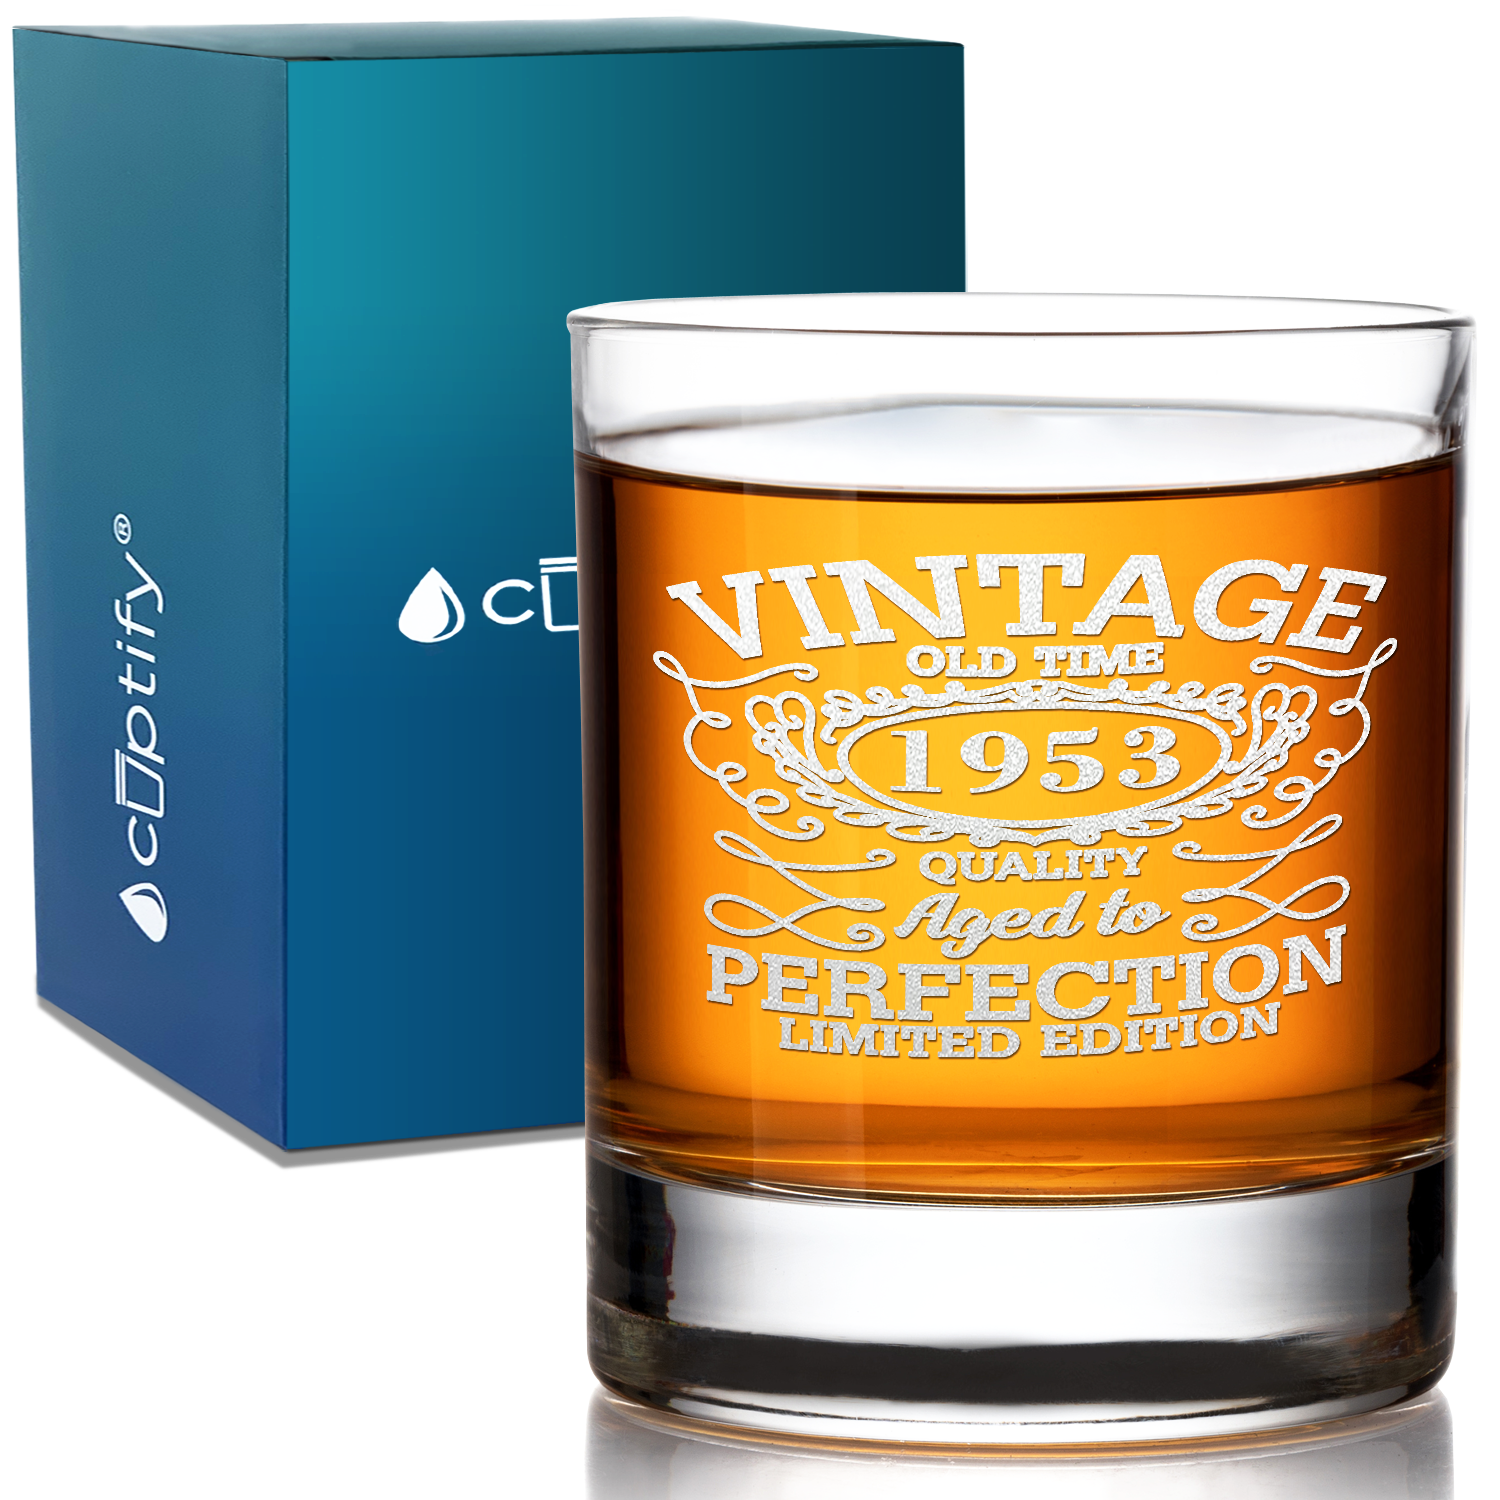 68th Birthday Vintage 68 Years Old Time 1953 Quality Laser Engraved 10.25oz Old Fashion Glass